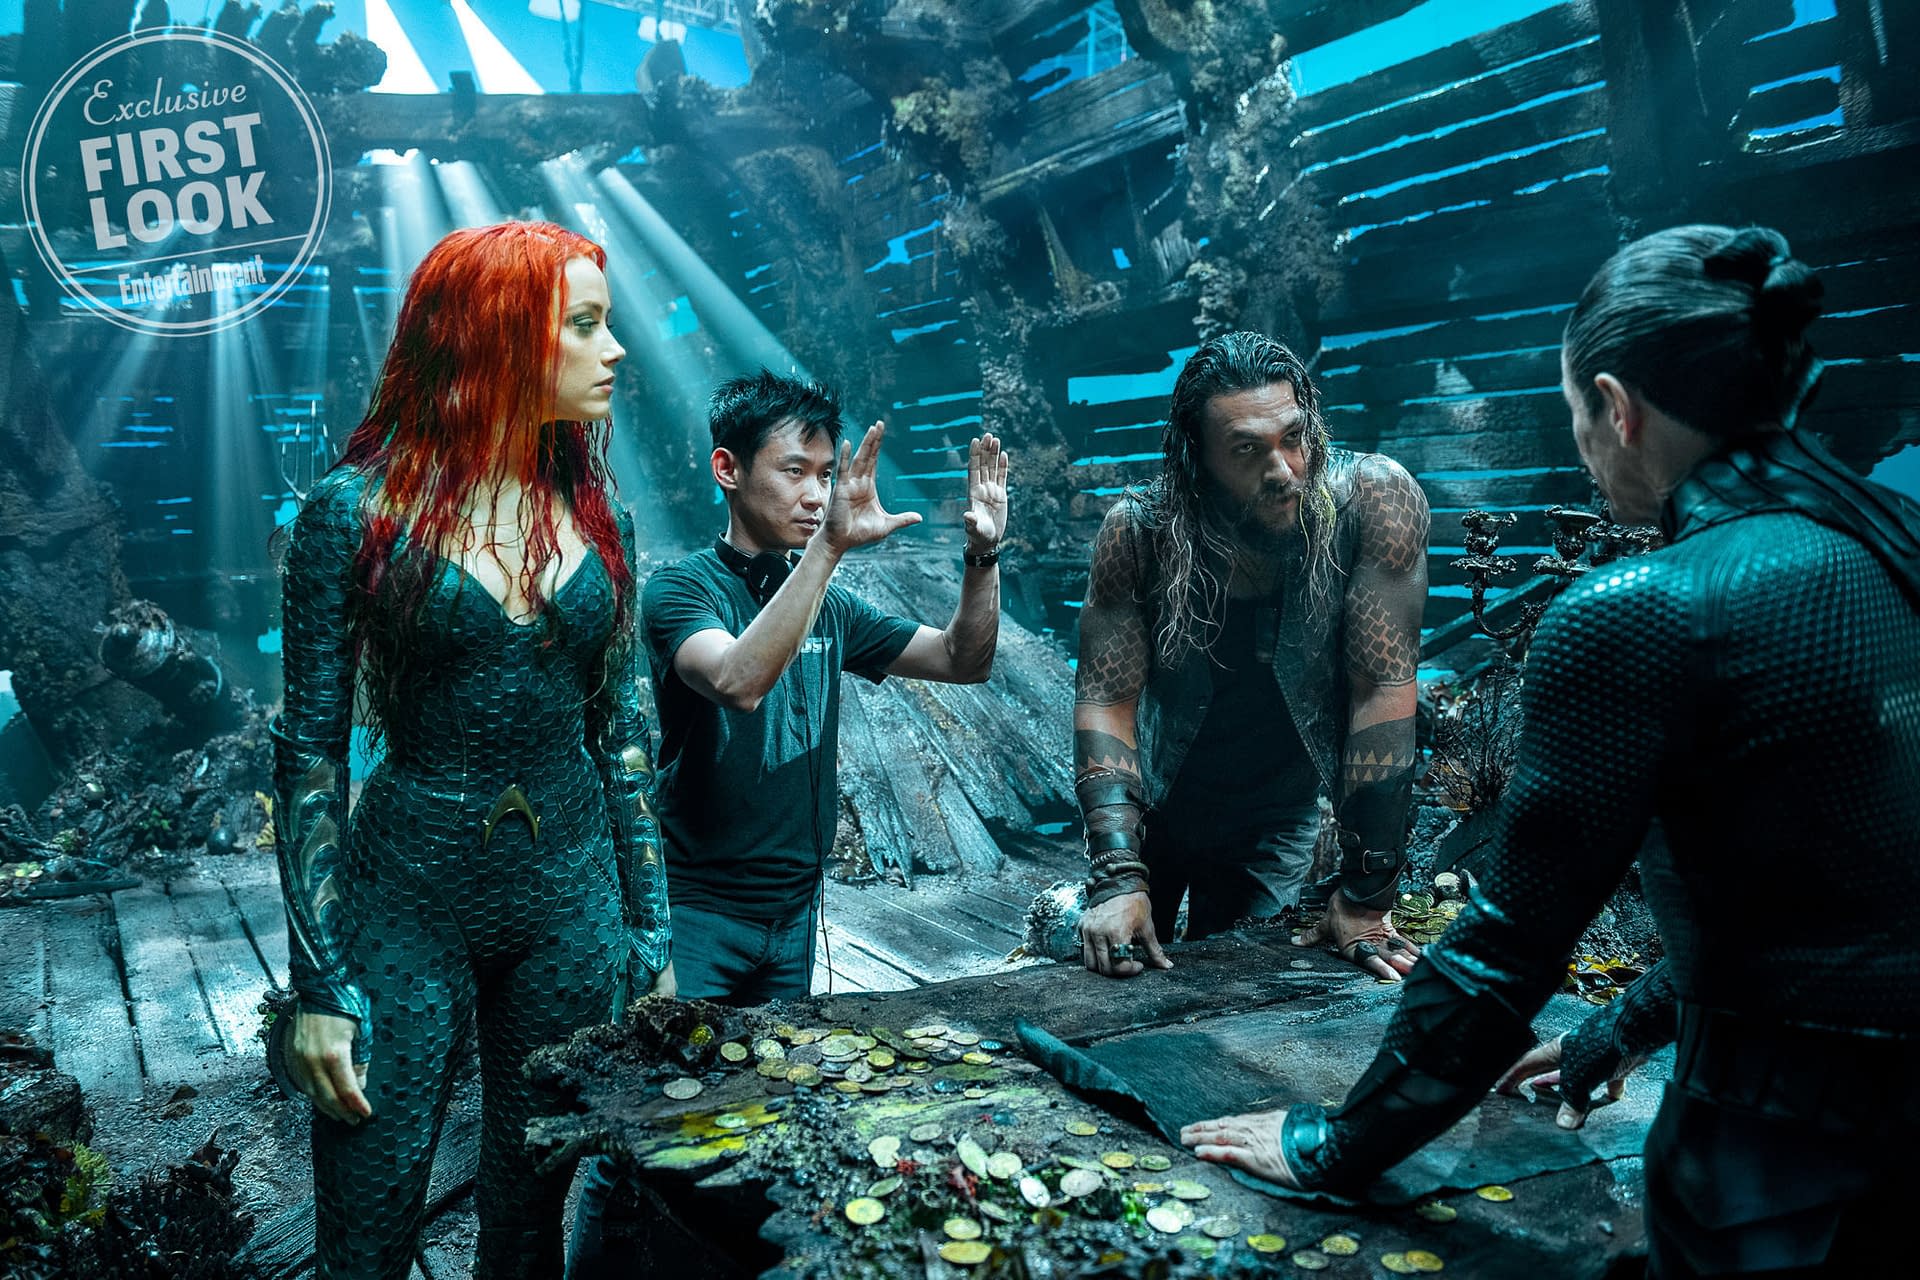 Aquaman Producer Says the Movie is an "Extraordinary Step" in DC Universe